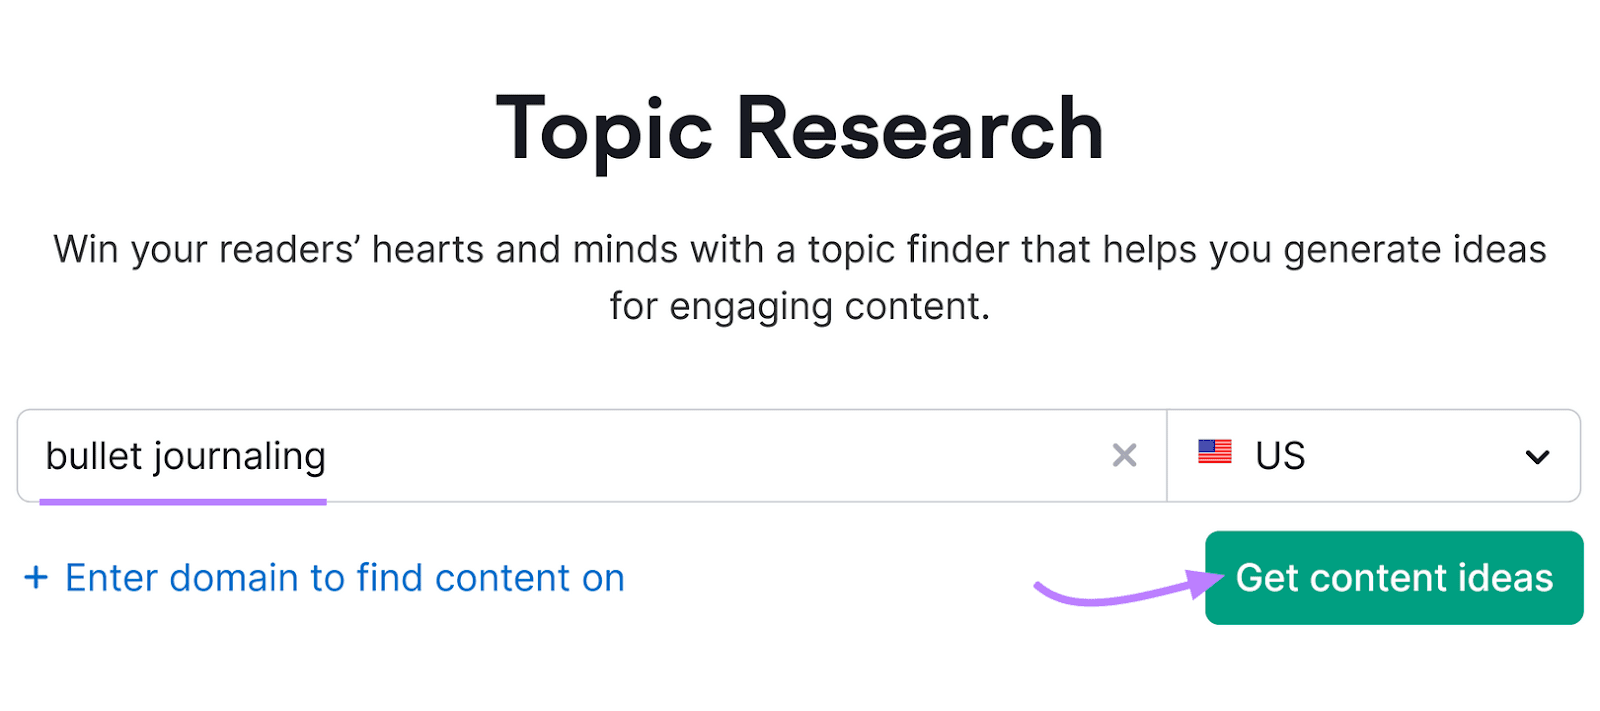 Topic Research tool with “bullet journaling” in the search bar.